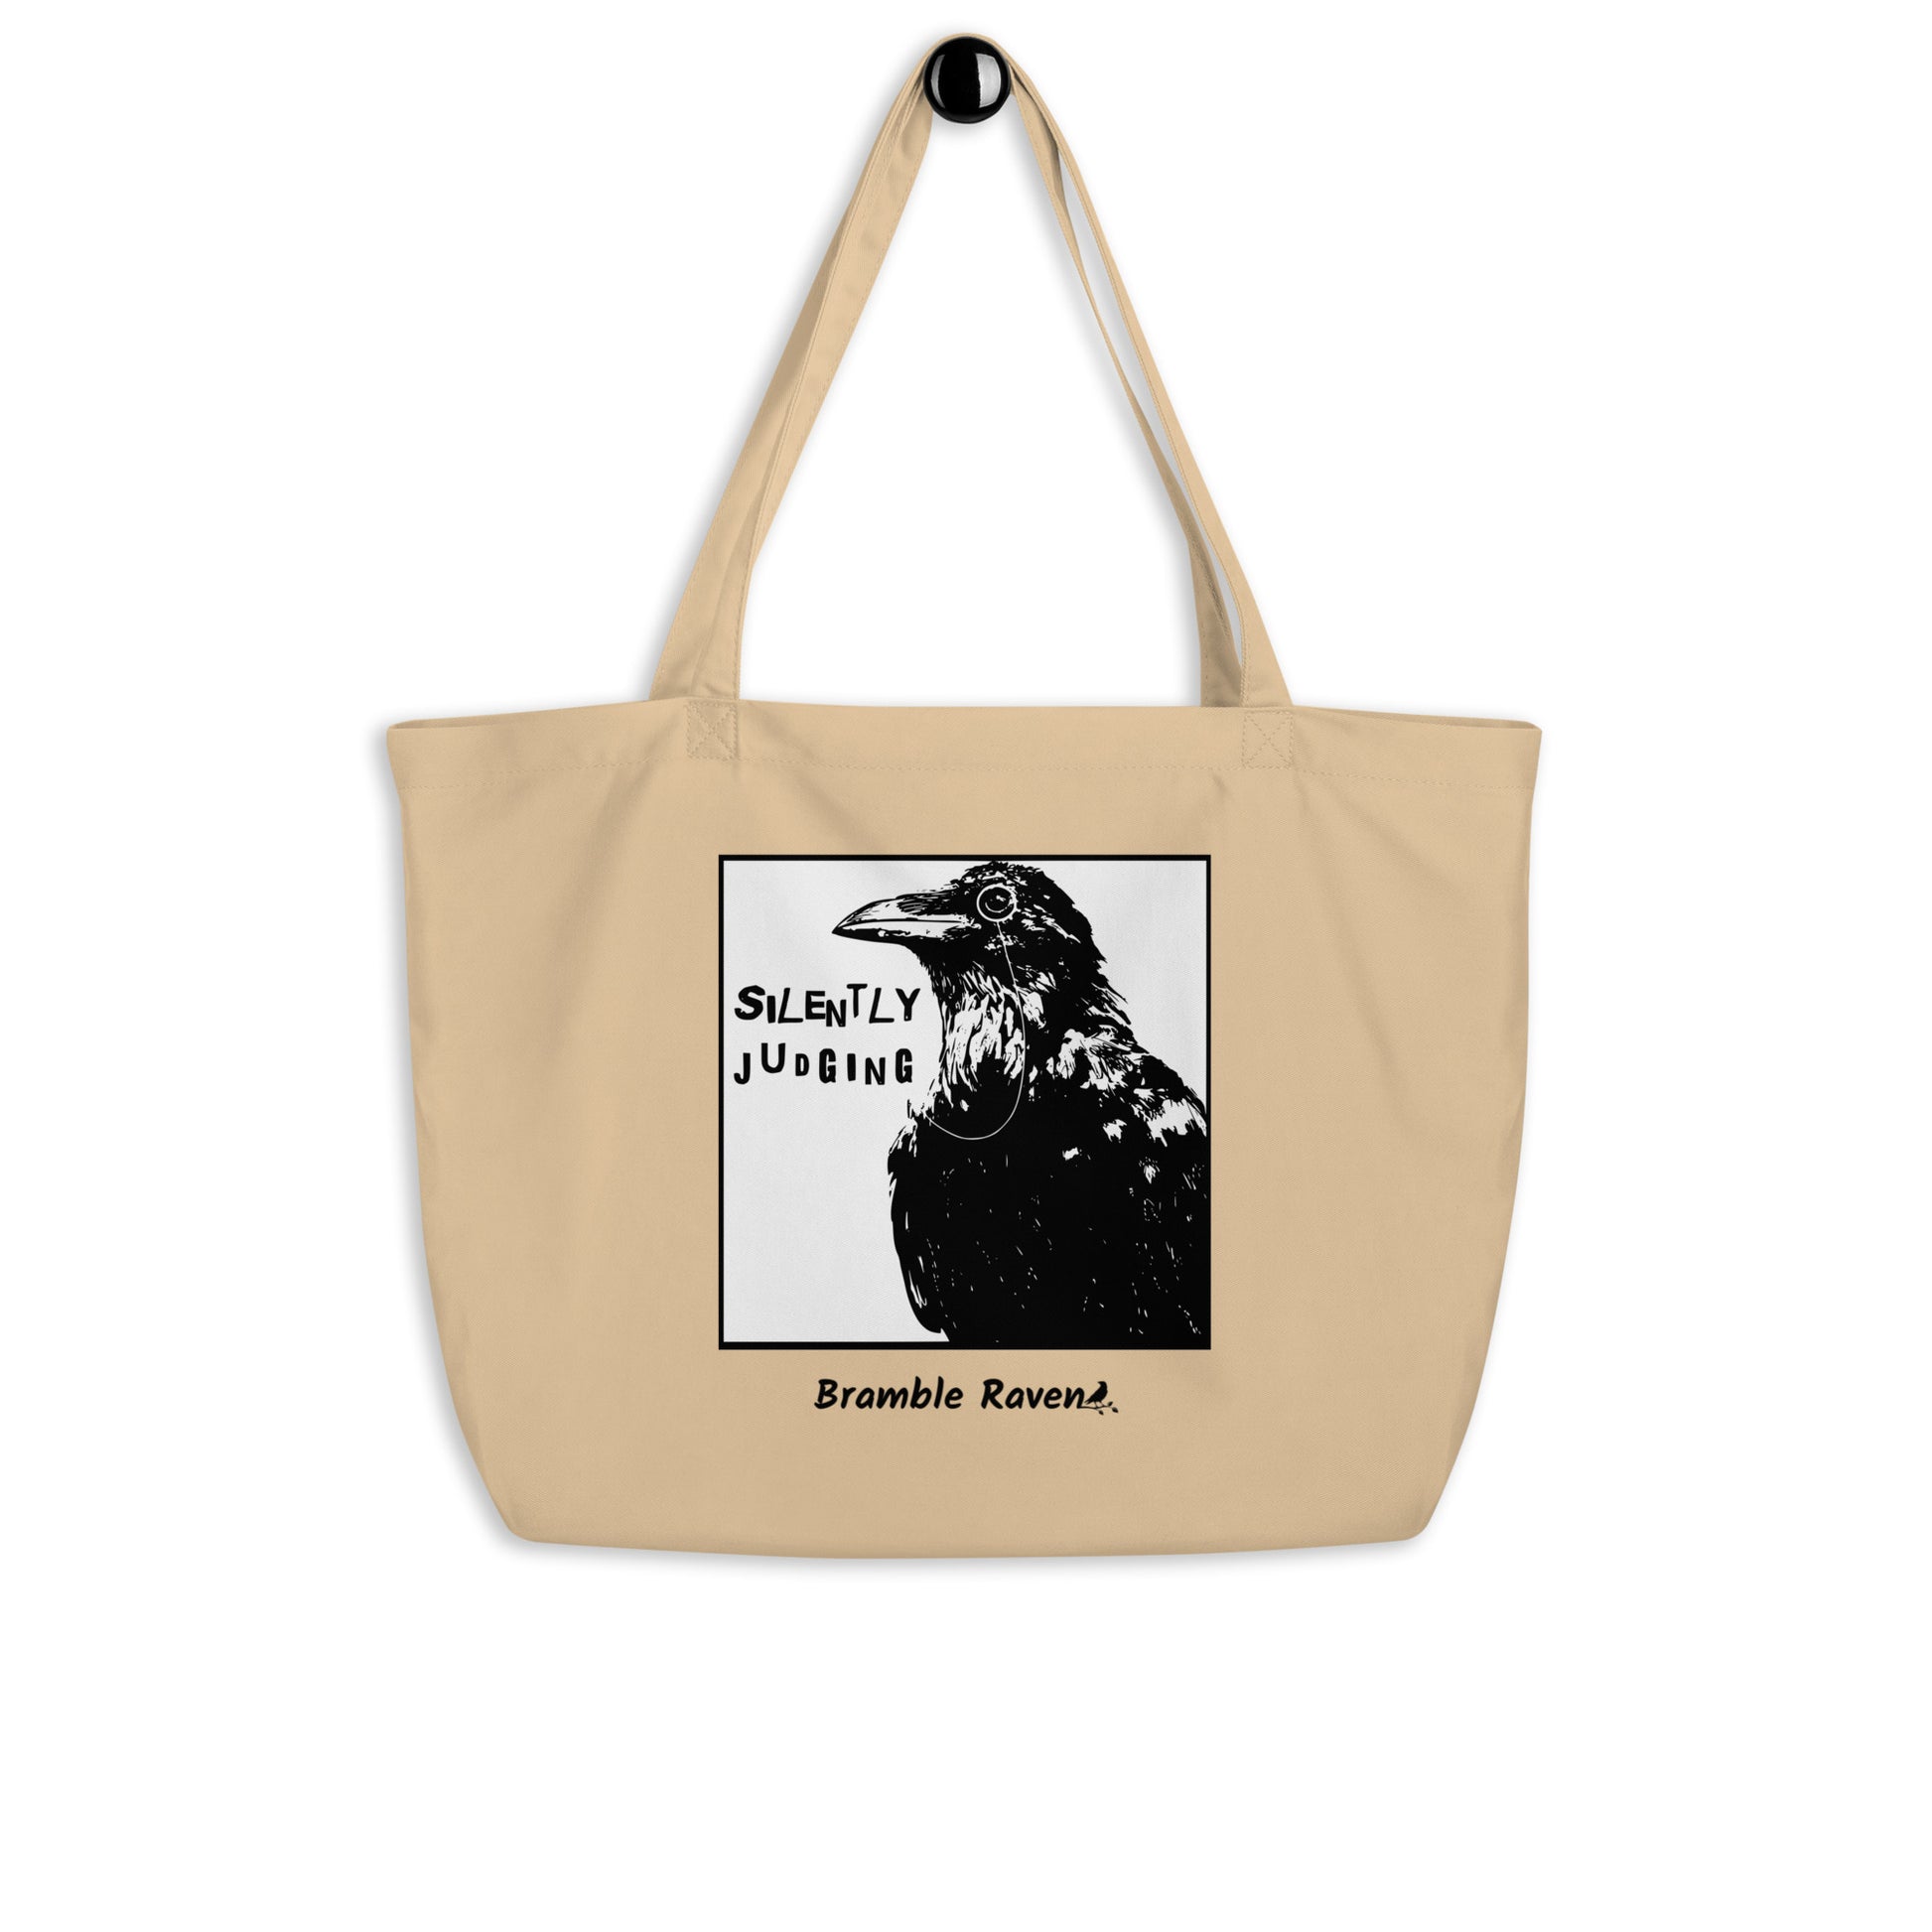 Original Silently Judging crow design. Silently Judging text. Black crow with monocle in square frame. Printed on large oyster-colored eco tote. 20 by 14 by 5 inches. 100% recycled cotton.